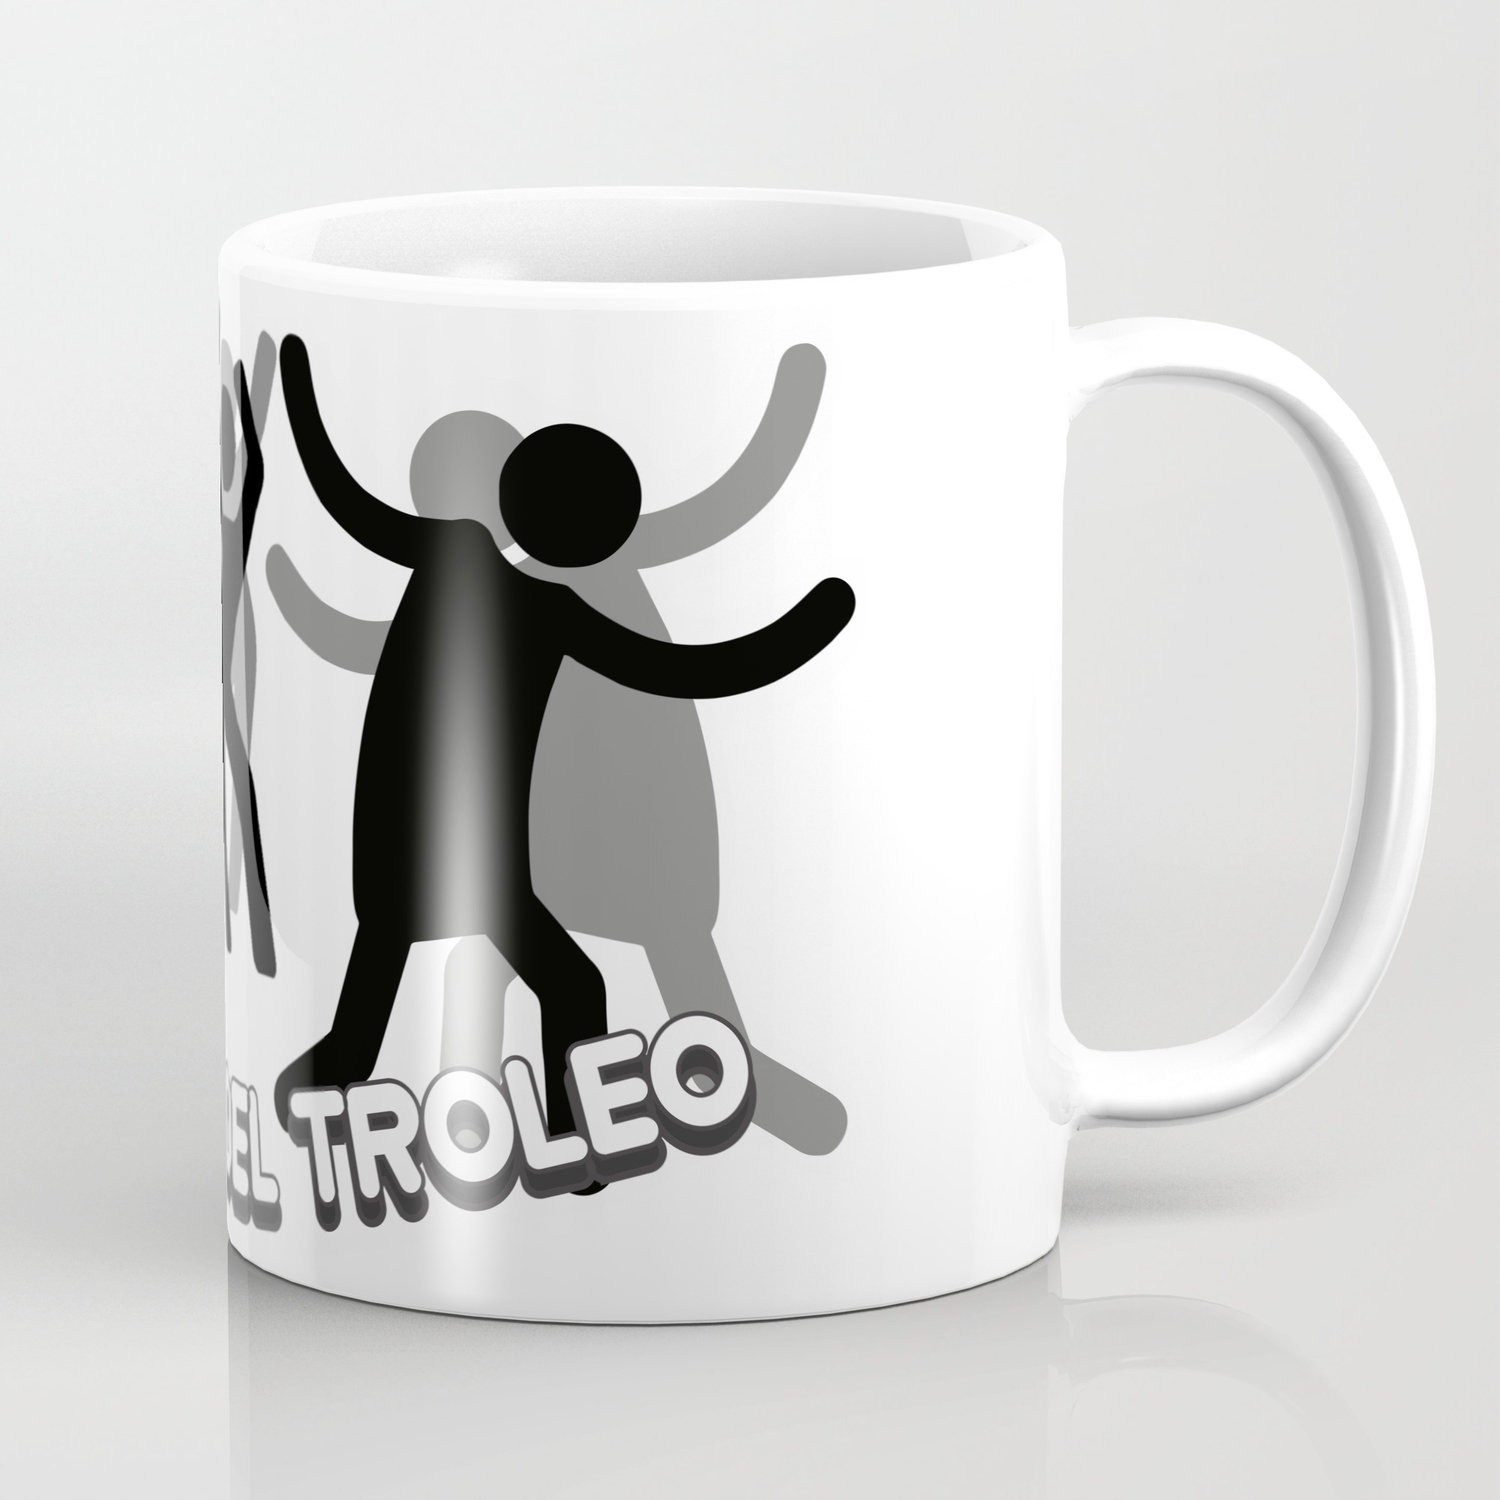 Spanish Trolling Dance Coffee Mug By Alejodesng Society6,How To Make Pina Coladas With Alcohol